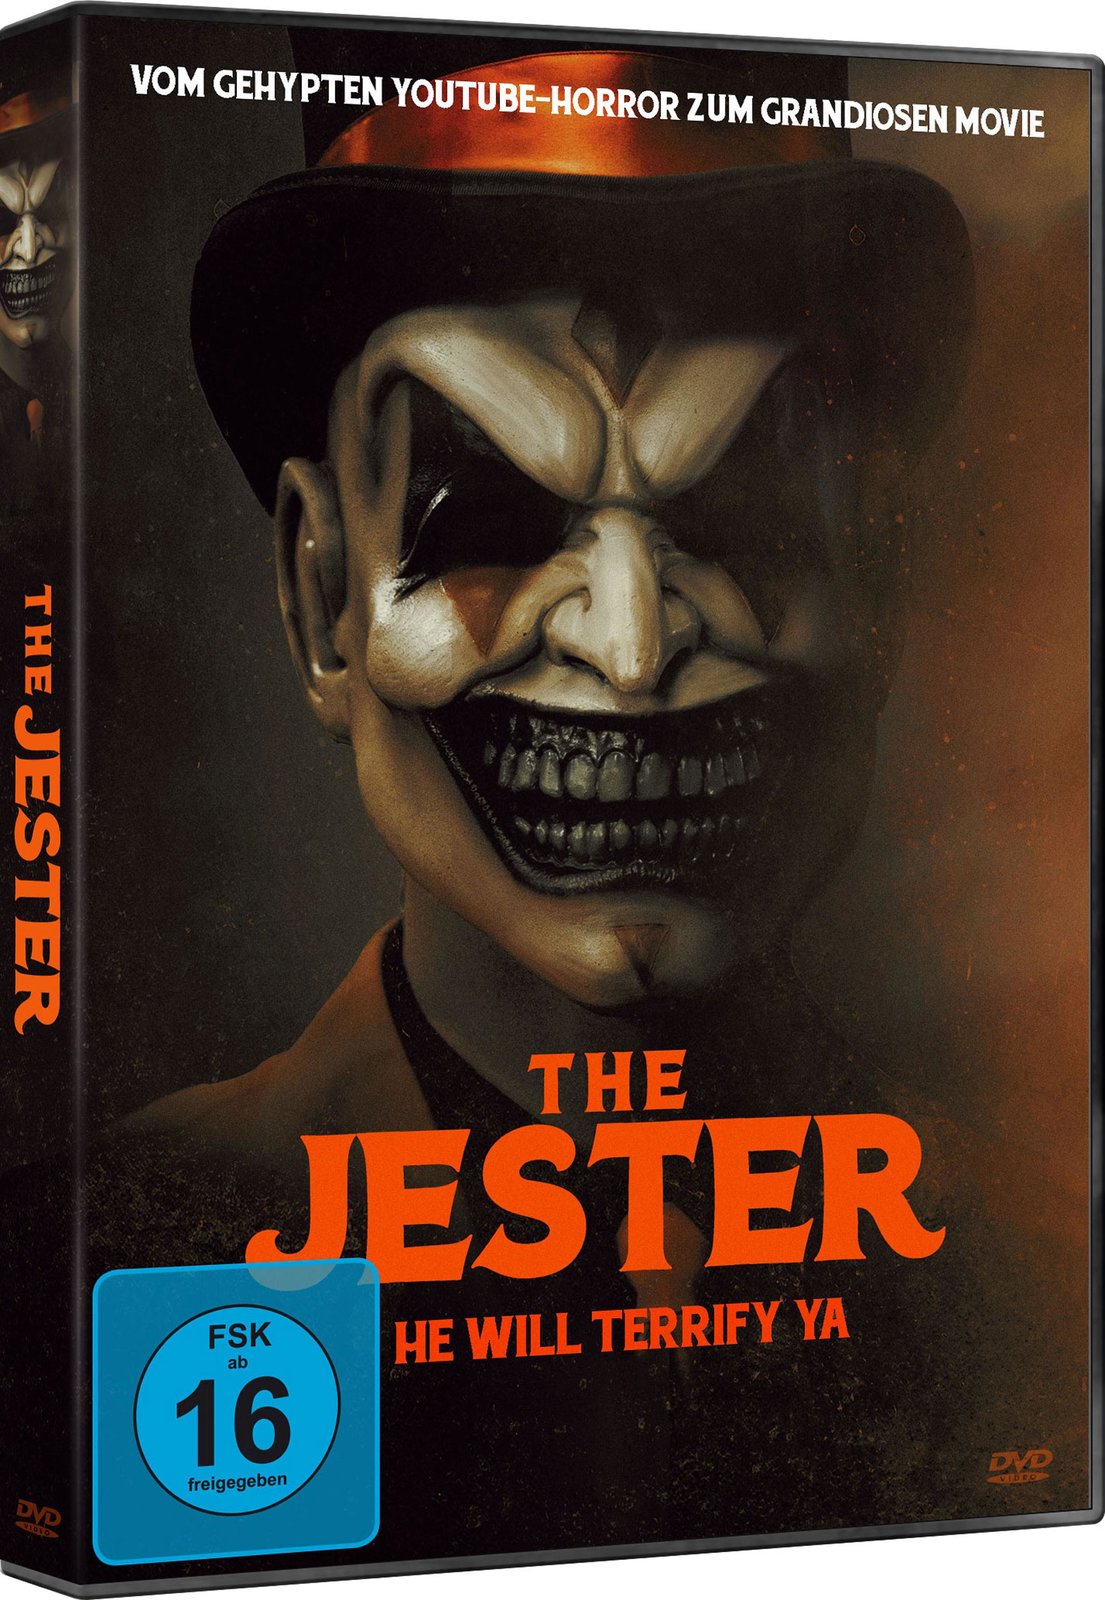 Jester, The - He will terrify you 